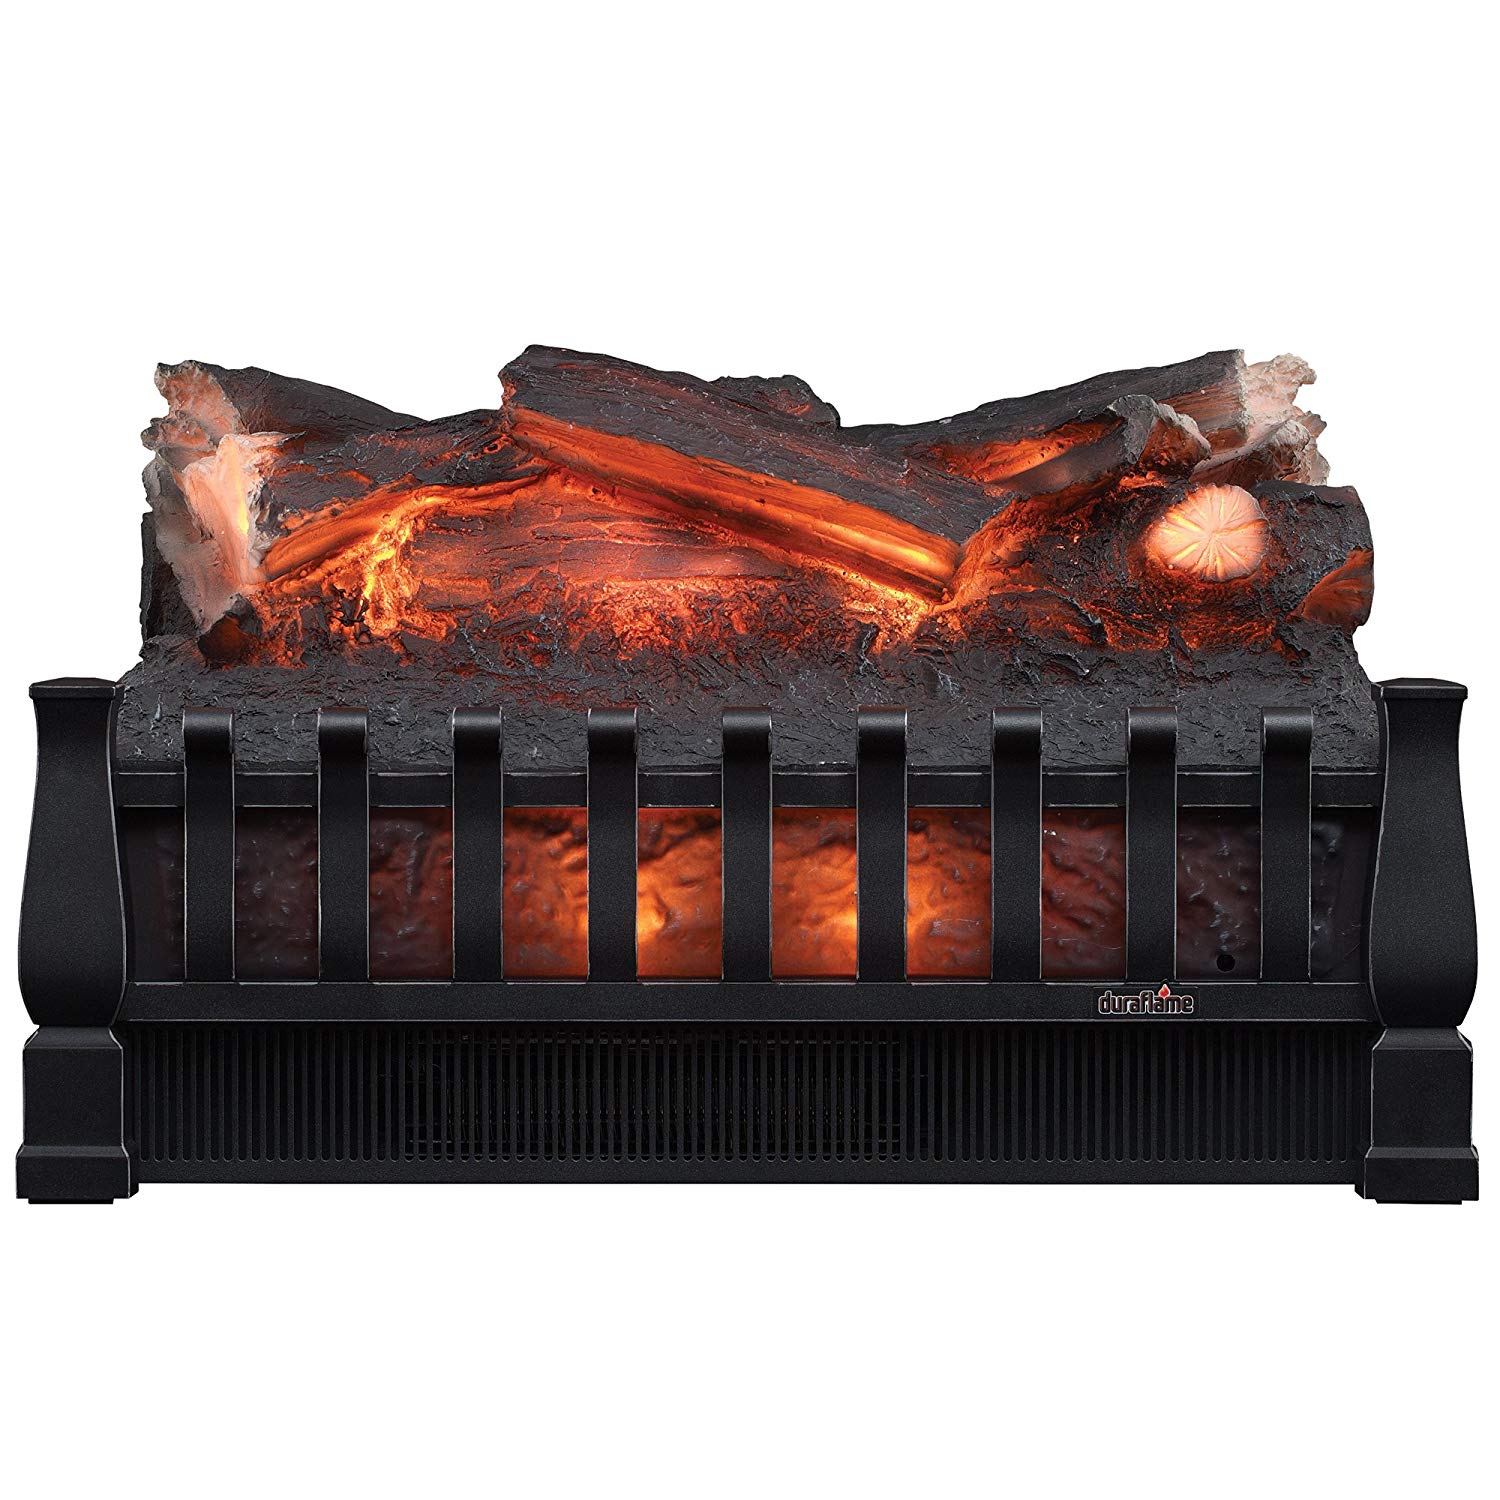 Heat Surge Electric Fireplace Manual Unique Duraflame Dfi021aru Electric Log Set Heater with Realistic Ember Bed Black